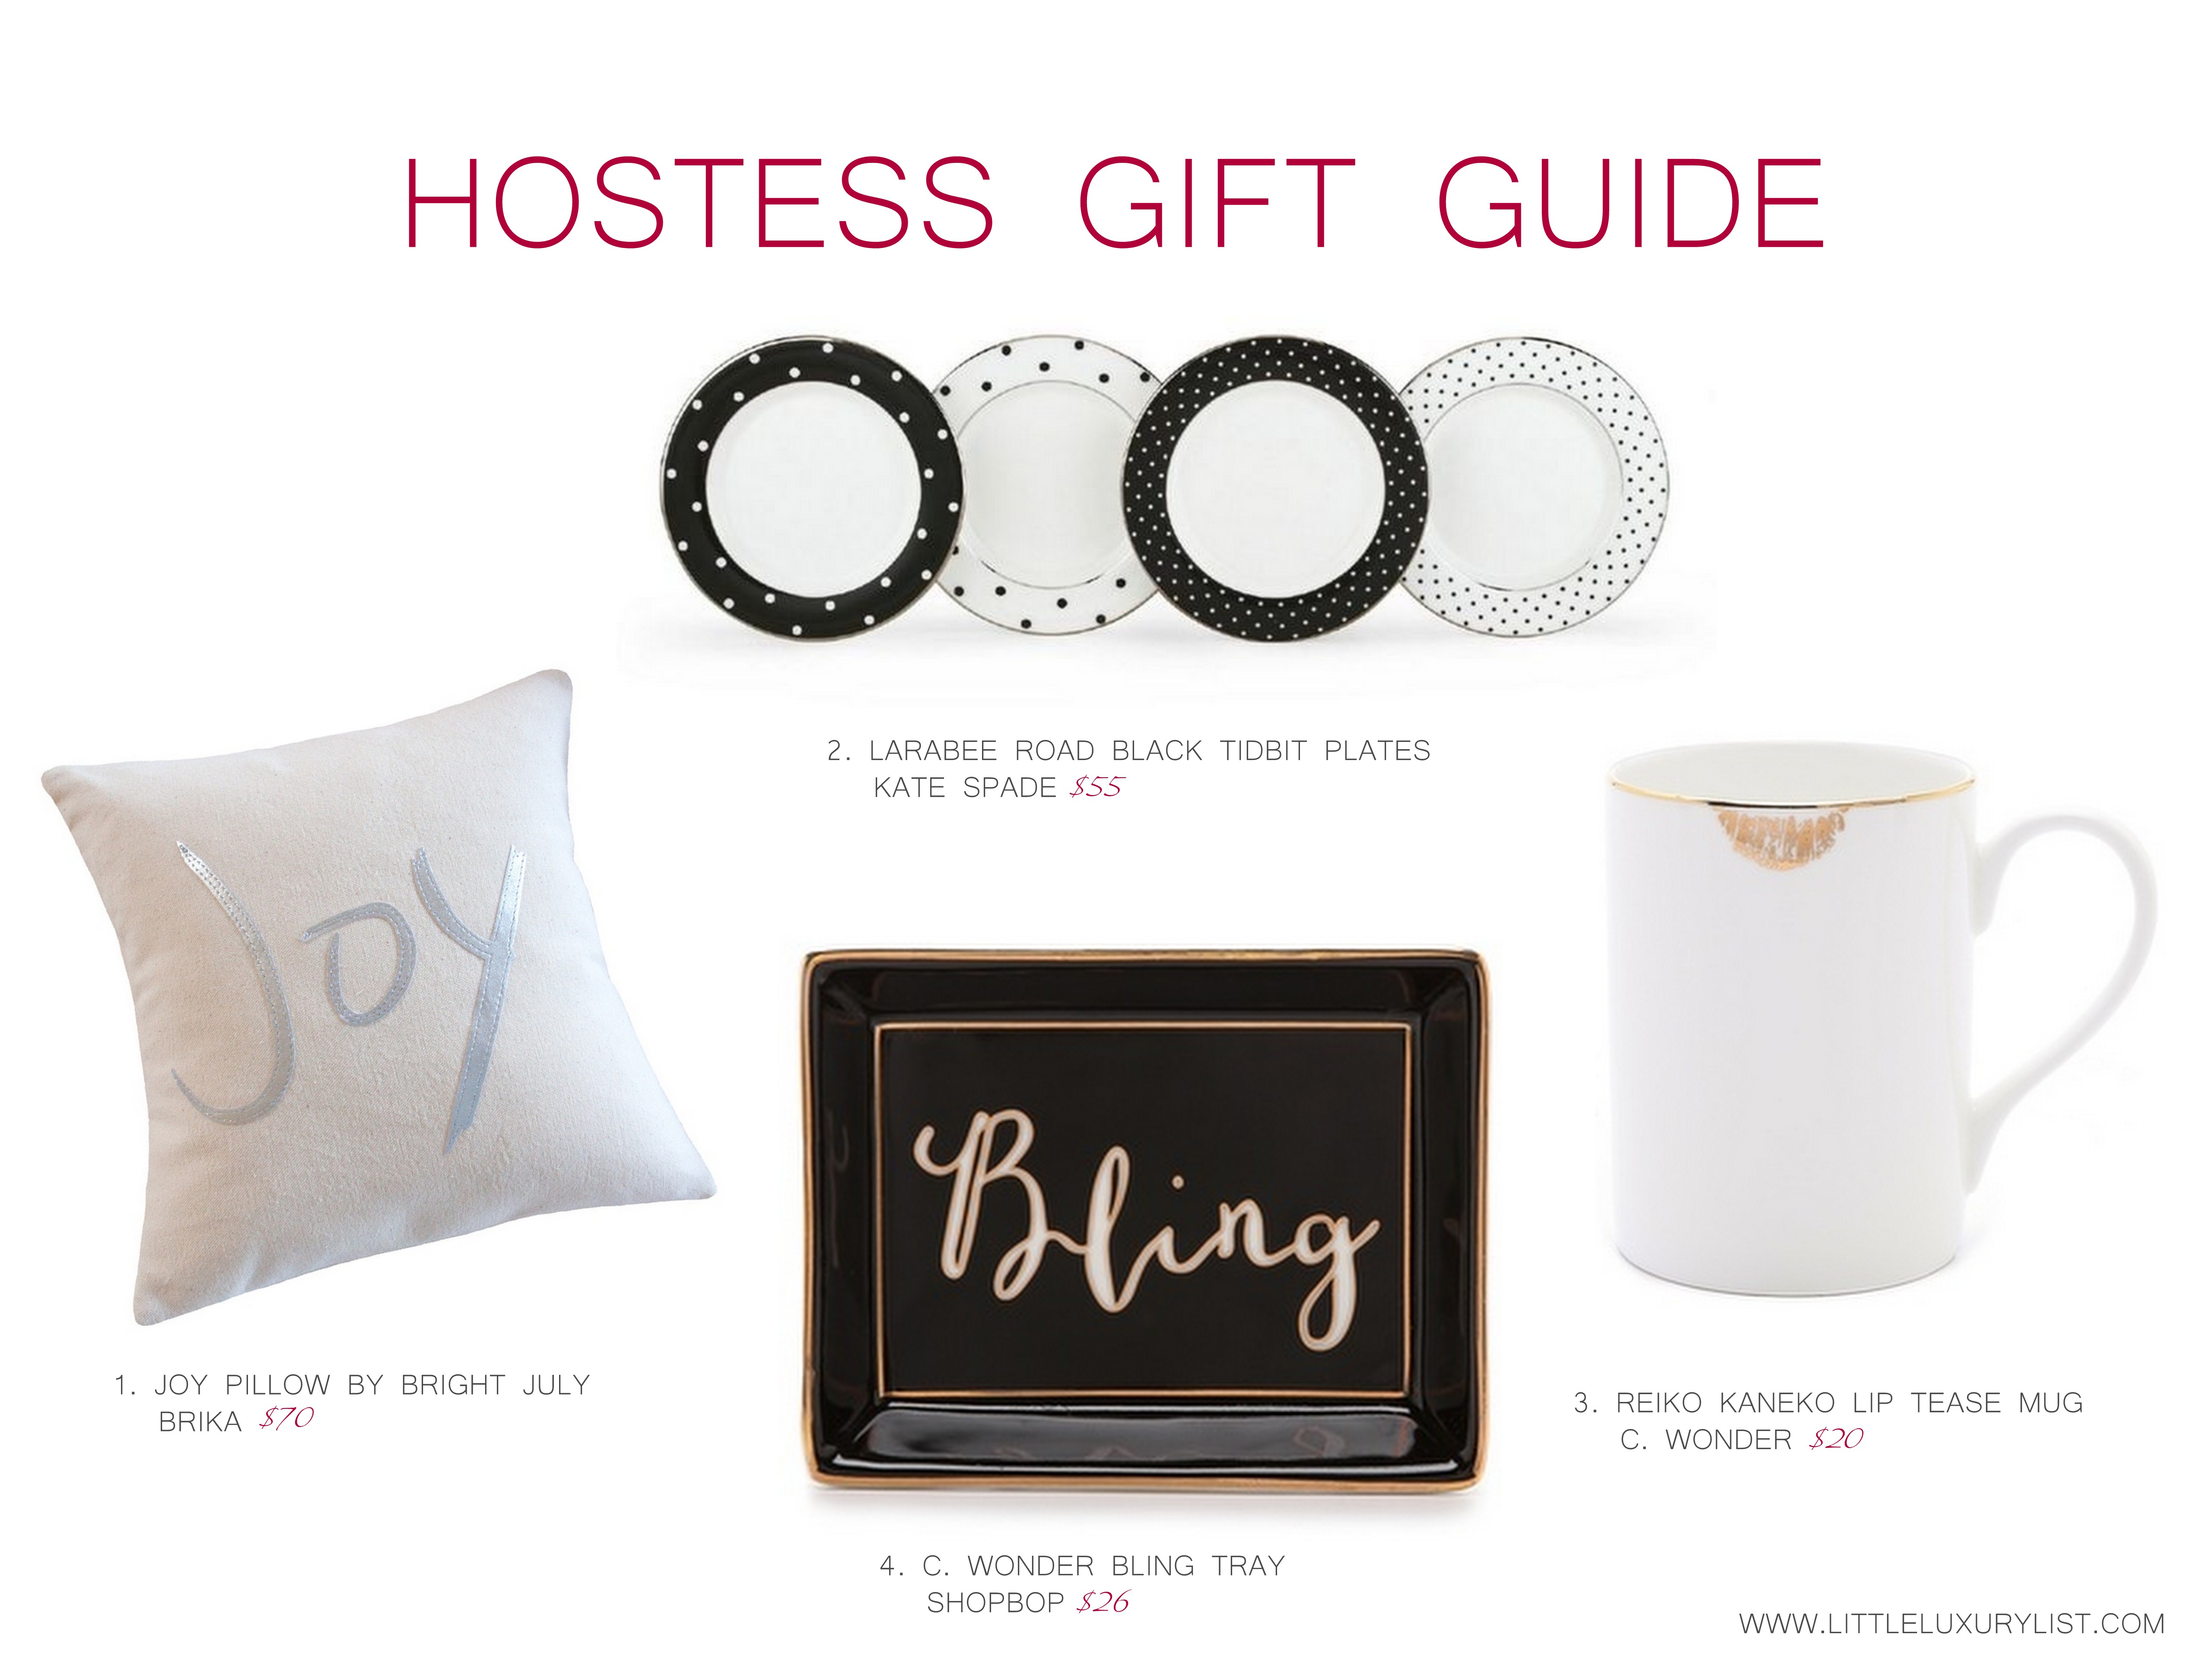 Hostess gift guide part 1 by little luxury list